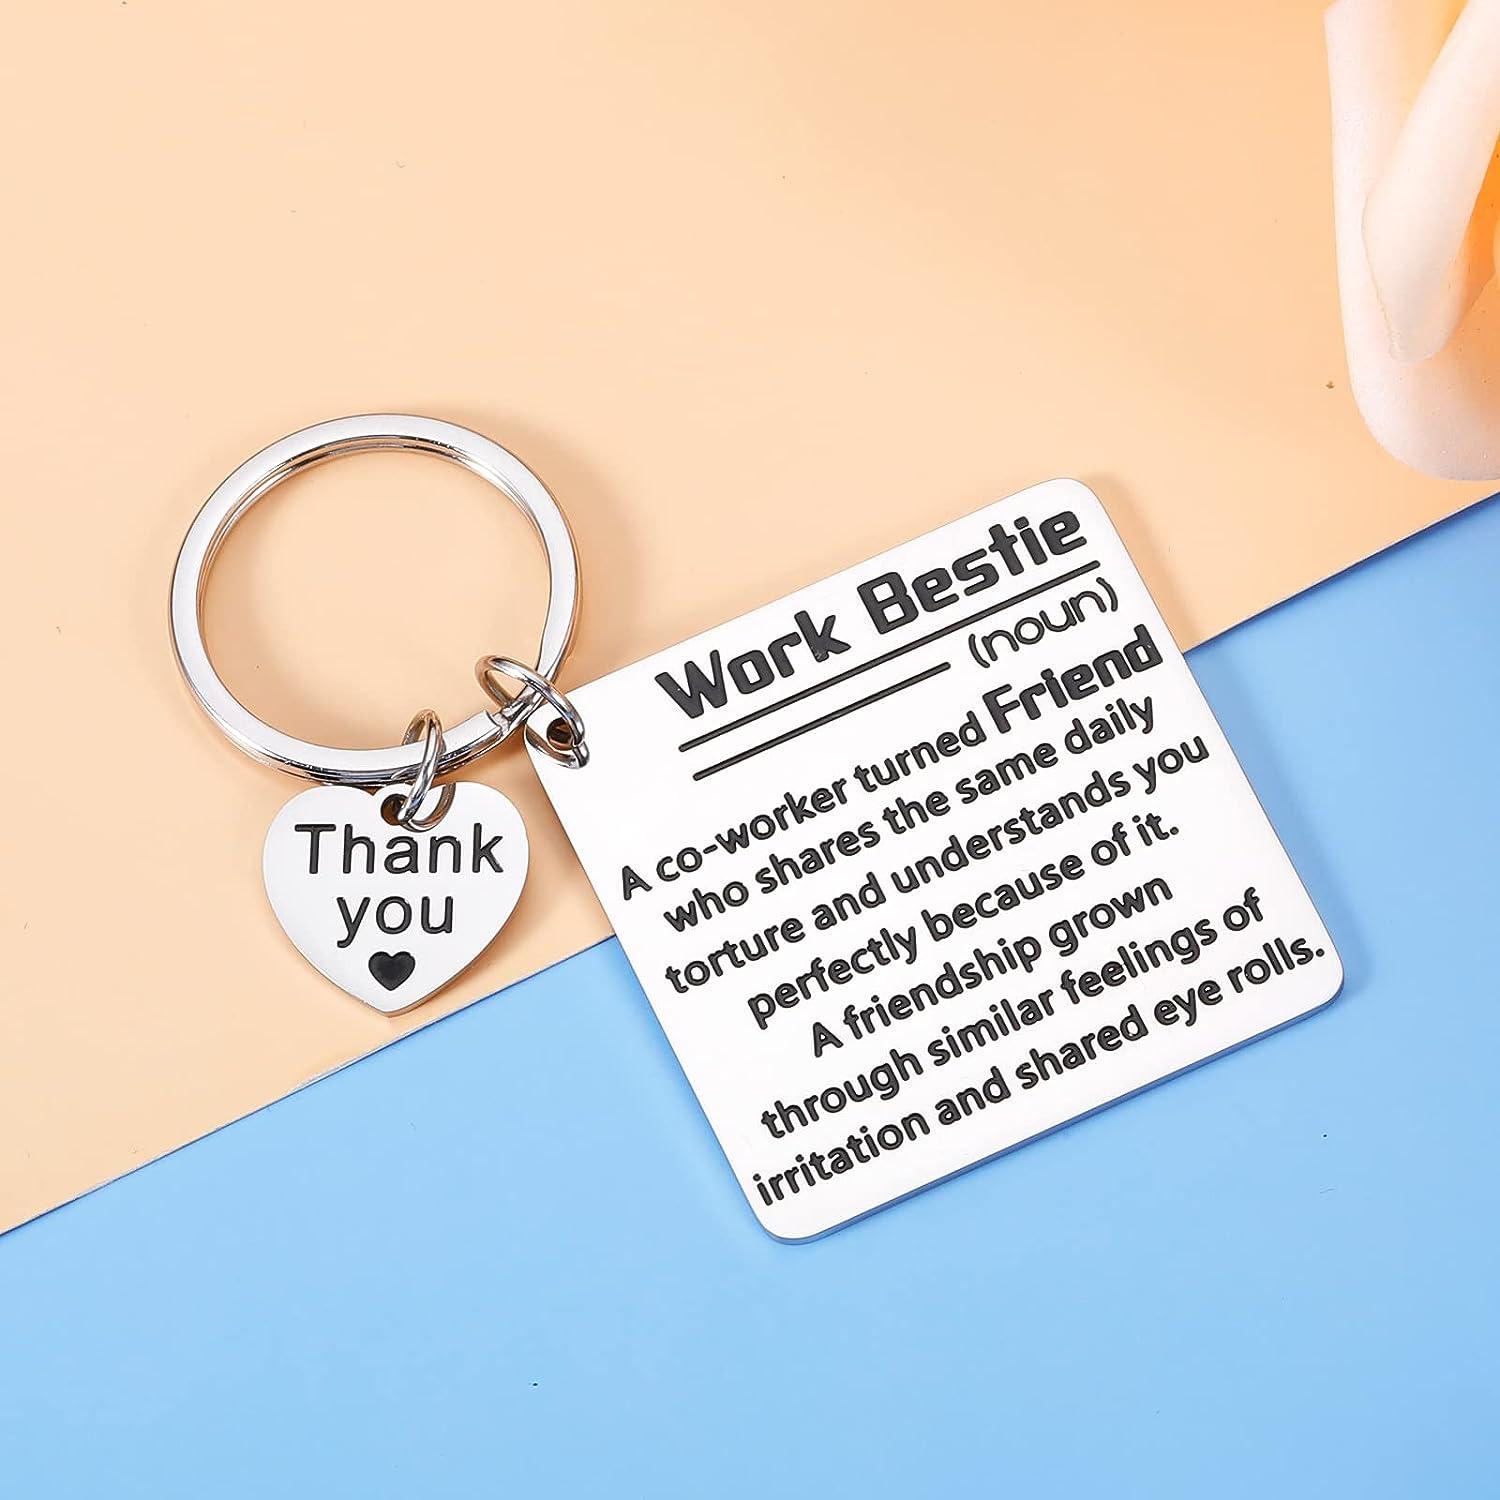 20 Welcome Back Gifts for Coworkers Who Have Been on Leave | Welcome back  gifts, Gifts for coworkers, Welcome back to work